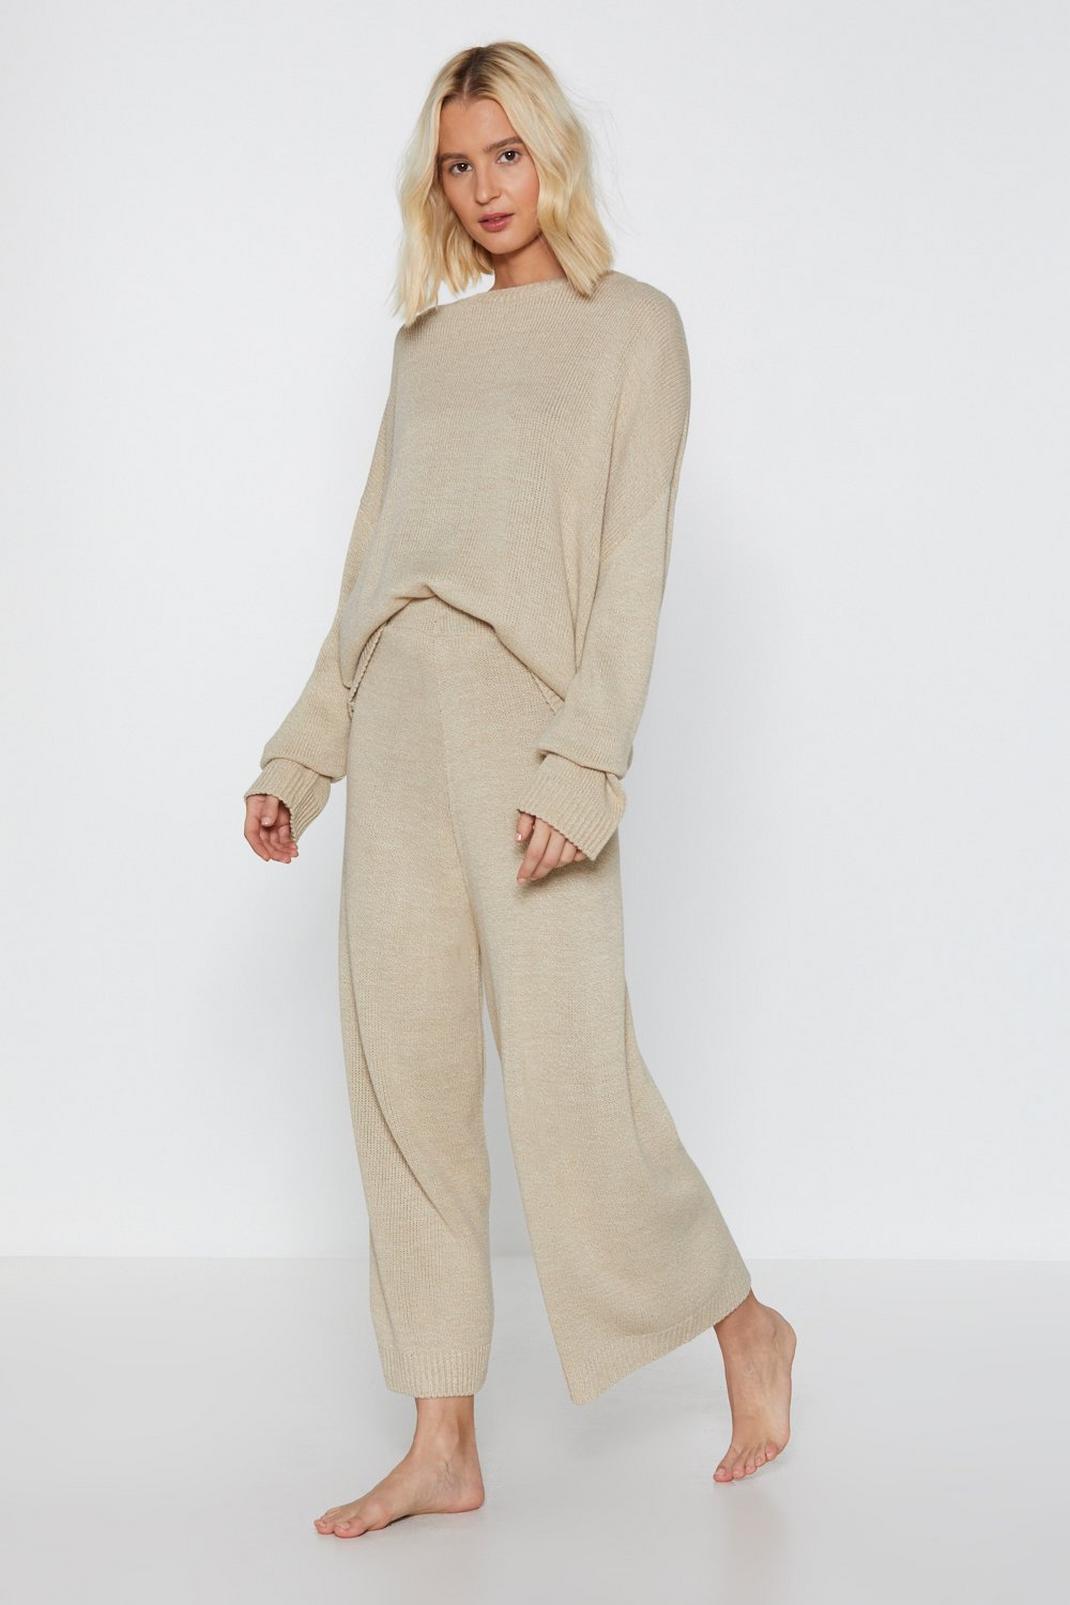 https://media.nastygal.com/i/nastygal/agg57128_oatmeal_xl/female-oatmeal-knitted-relaxed-lounge-set/?w=1070&qlt=default&fmt.jp2.qlt=70&fmt=auto&sm=fit